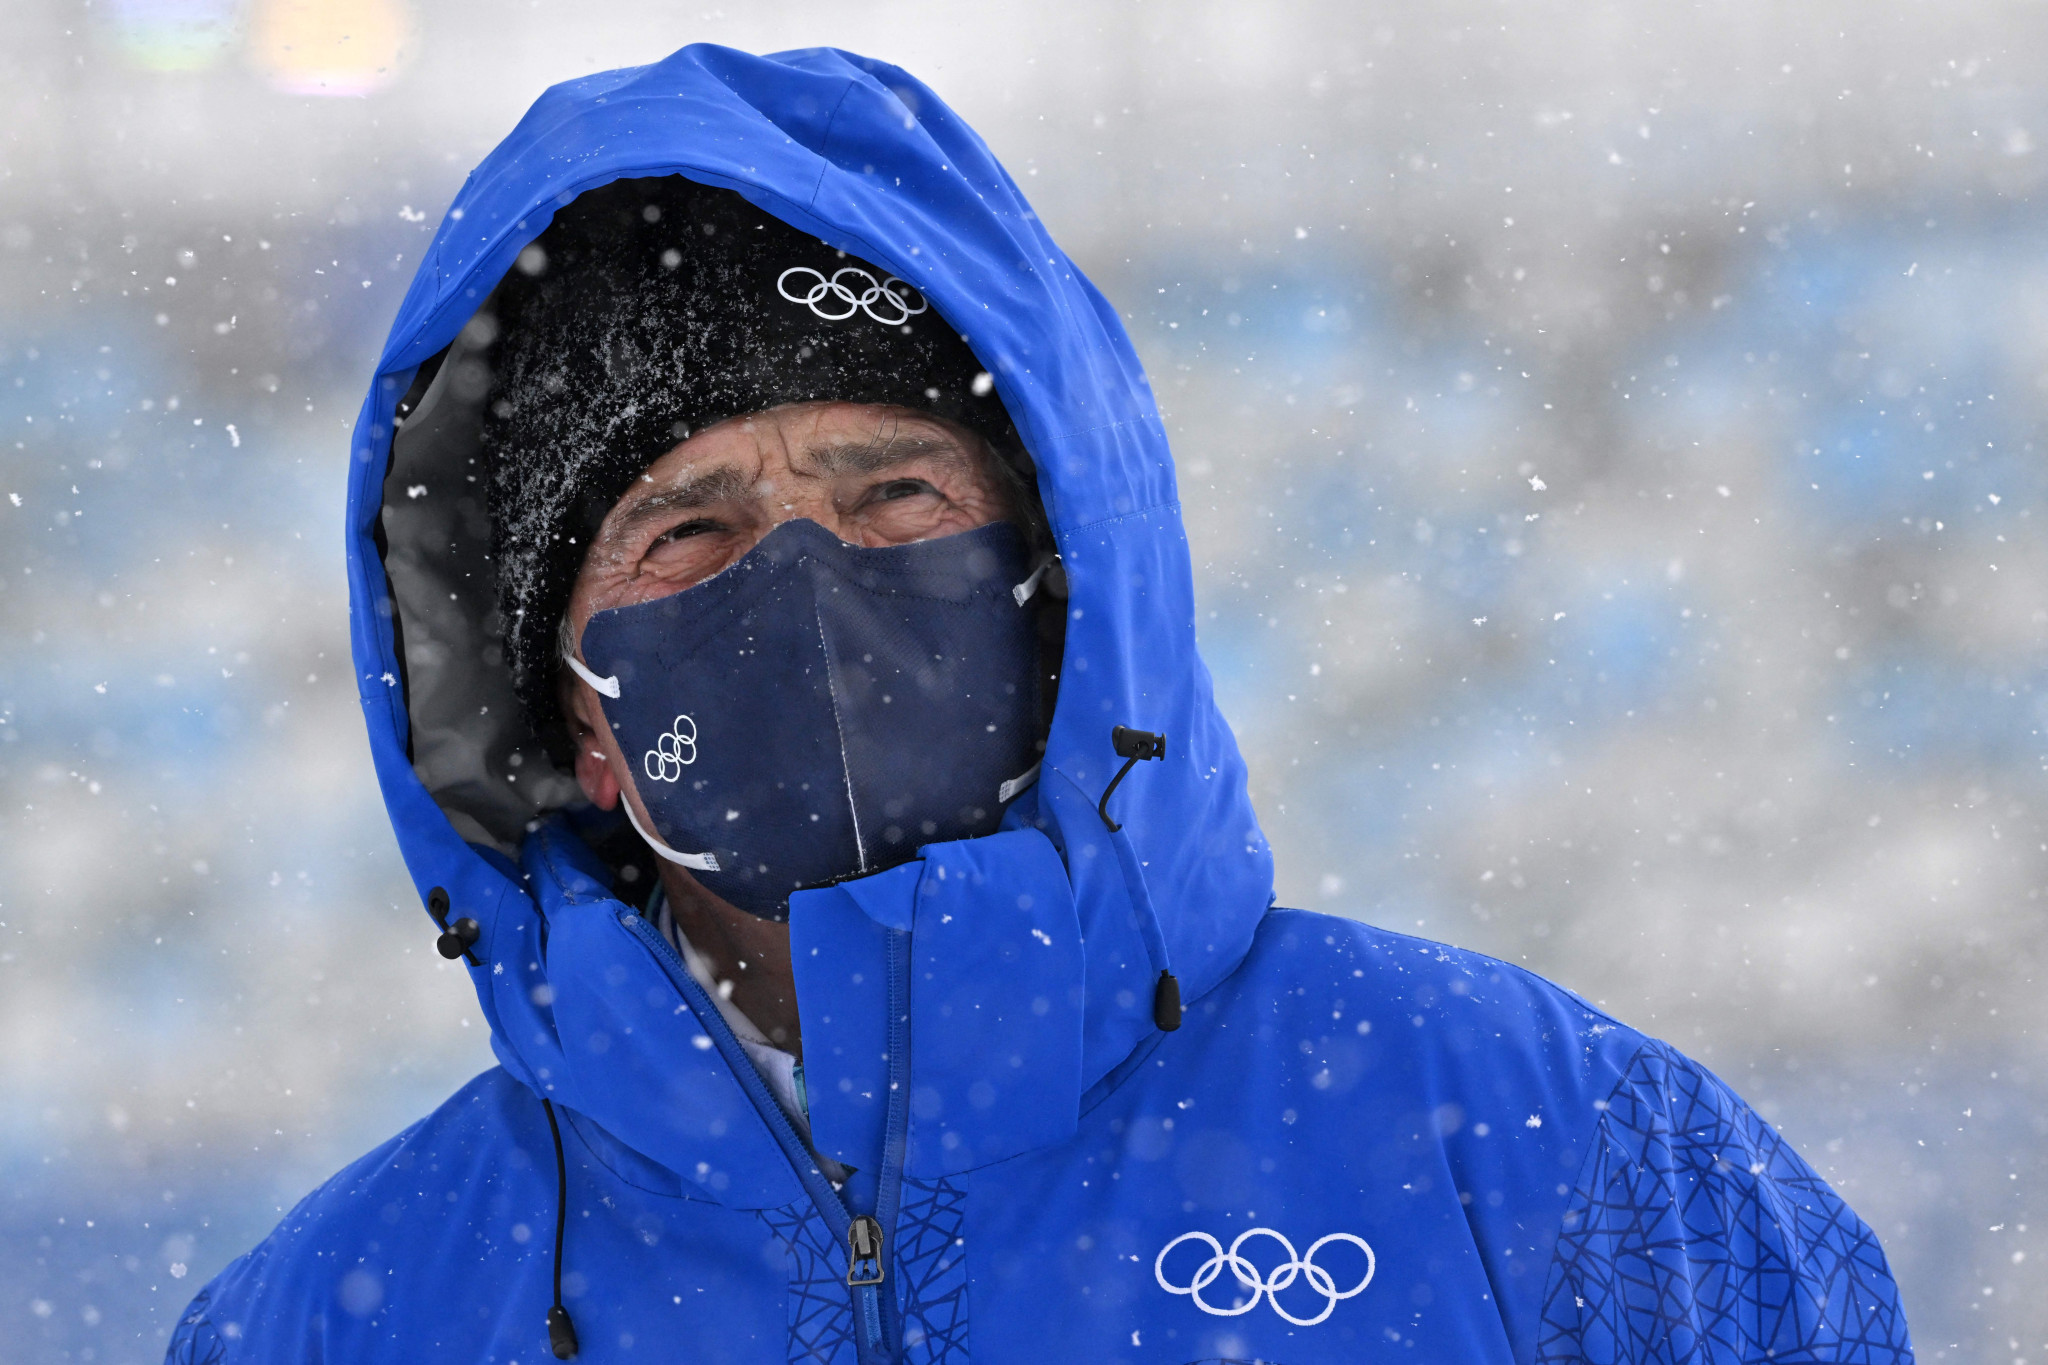 Juan Antonio Samaranch, chairman of the Beijing 2022 IOC Coordination Commission has praised Beijing 2022 for putting up such a successful Olympic Games, despite the COVID-19 pandemic ©Getty Images